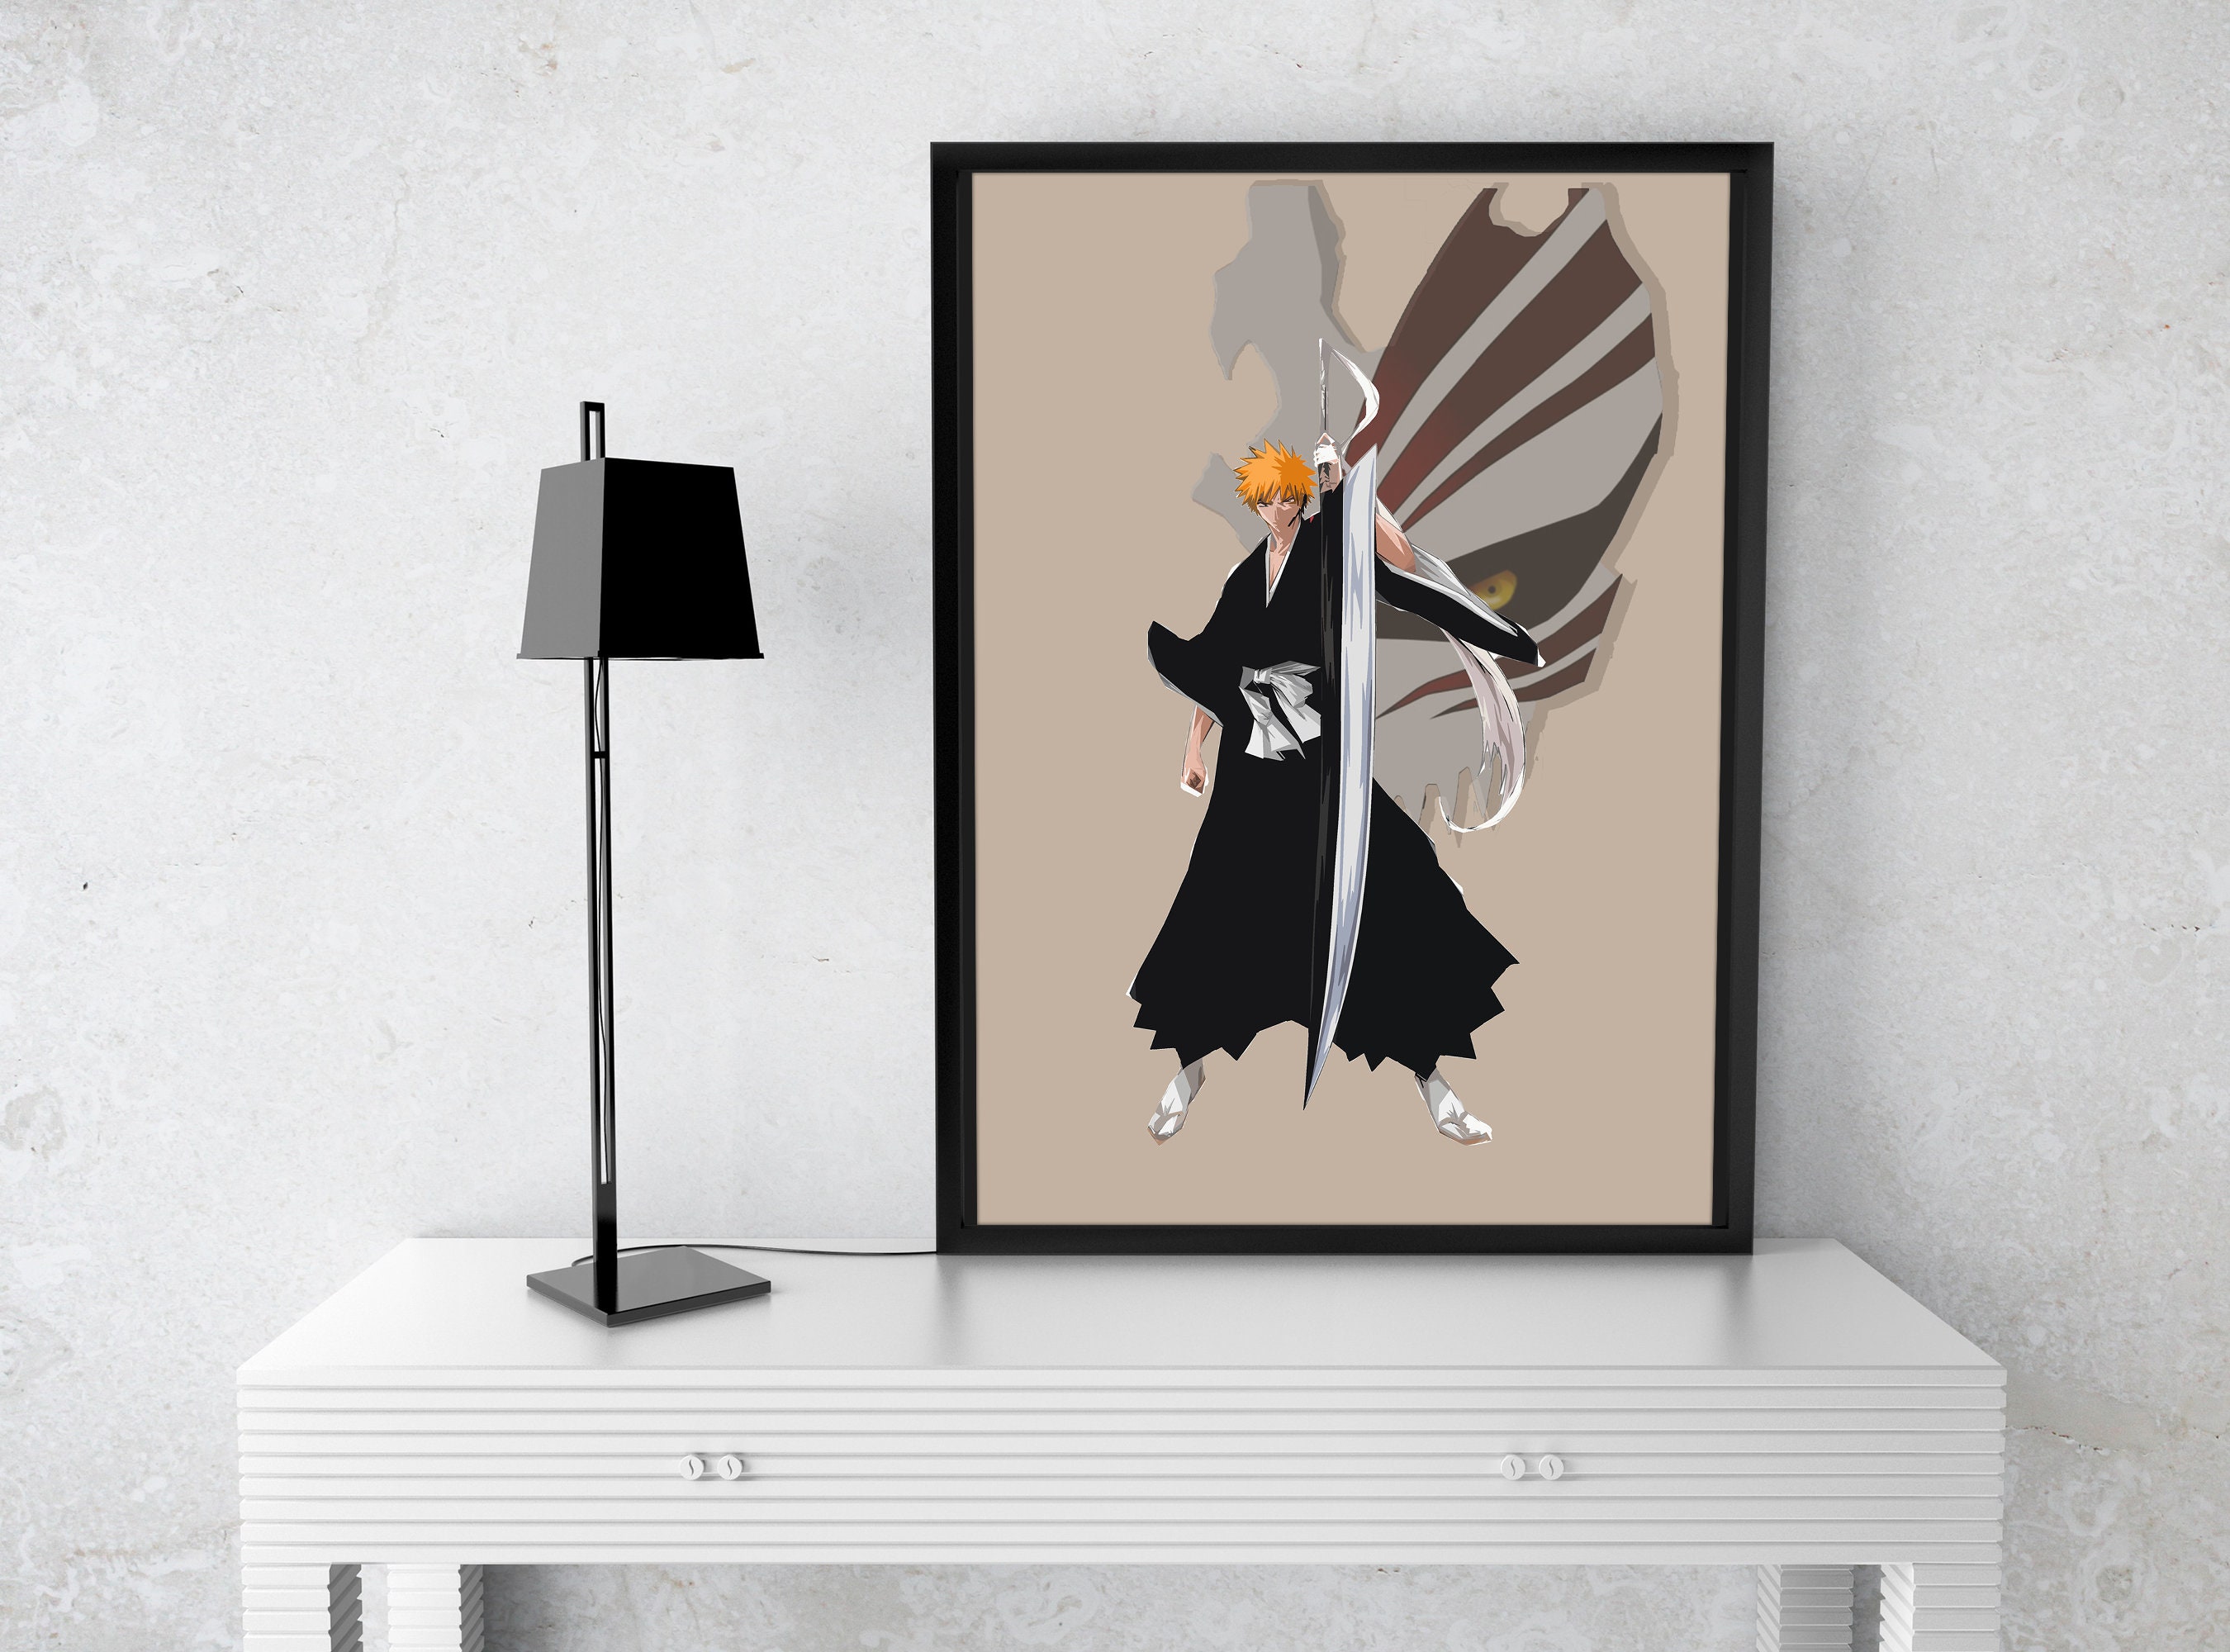  POSTER STOP ONLINE Bleach - Manga Anime TV Show Poster Print  (Group - Chained) (Size 24 x 36) (Clear Poster Hanger) : Office Products